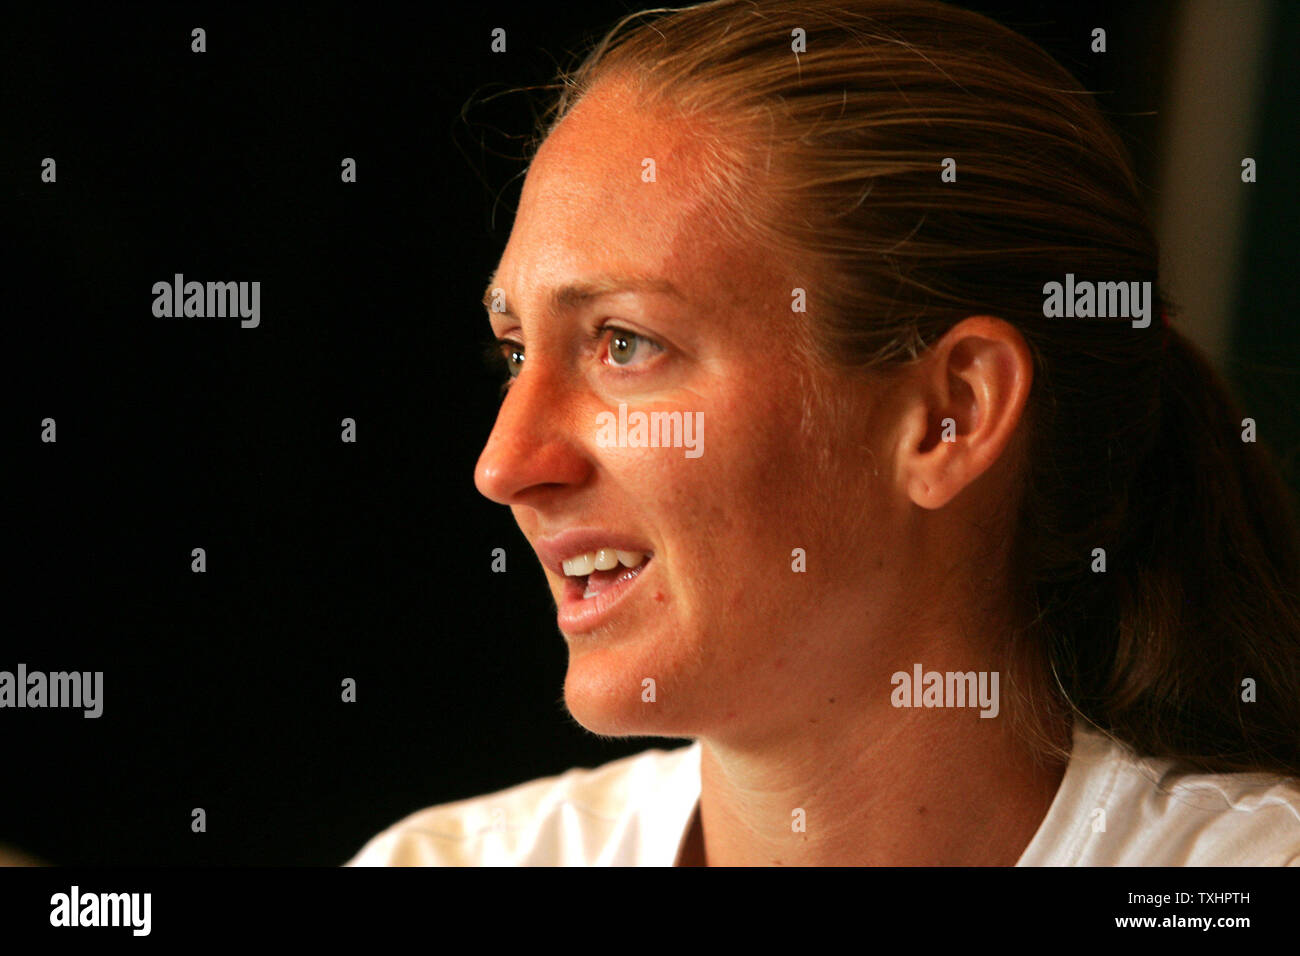 Mary Pierce of France, 2005 French Open finalist,  answers questions during interviews on media day at Acura Classic women's tennis tournament, Carlsbad, California, USA on August 01, 2005.  Major seeded players Maria Sharapova and Serena Williams have withdrawn due to injuries. While Mary Pierce, Lindsay Davenport and Kim Clijsters begin competing this week with finals on August 7, 2005. (UPI Photo/Tom Theobald) Stock Photo